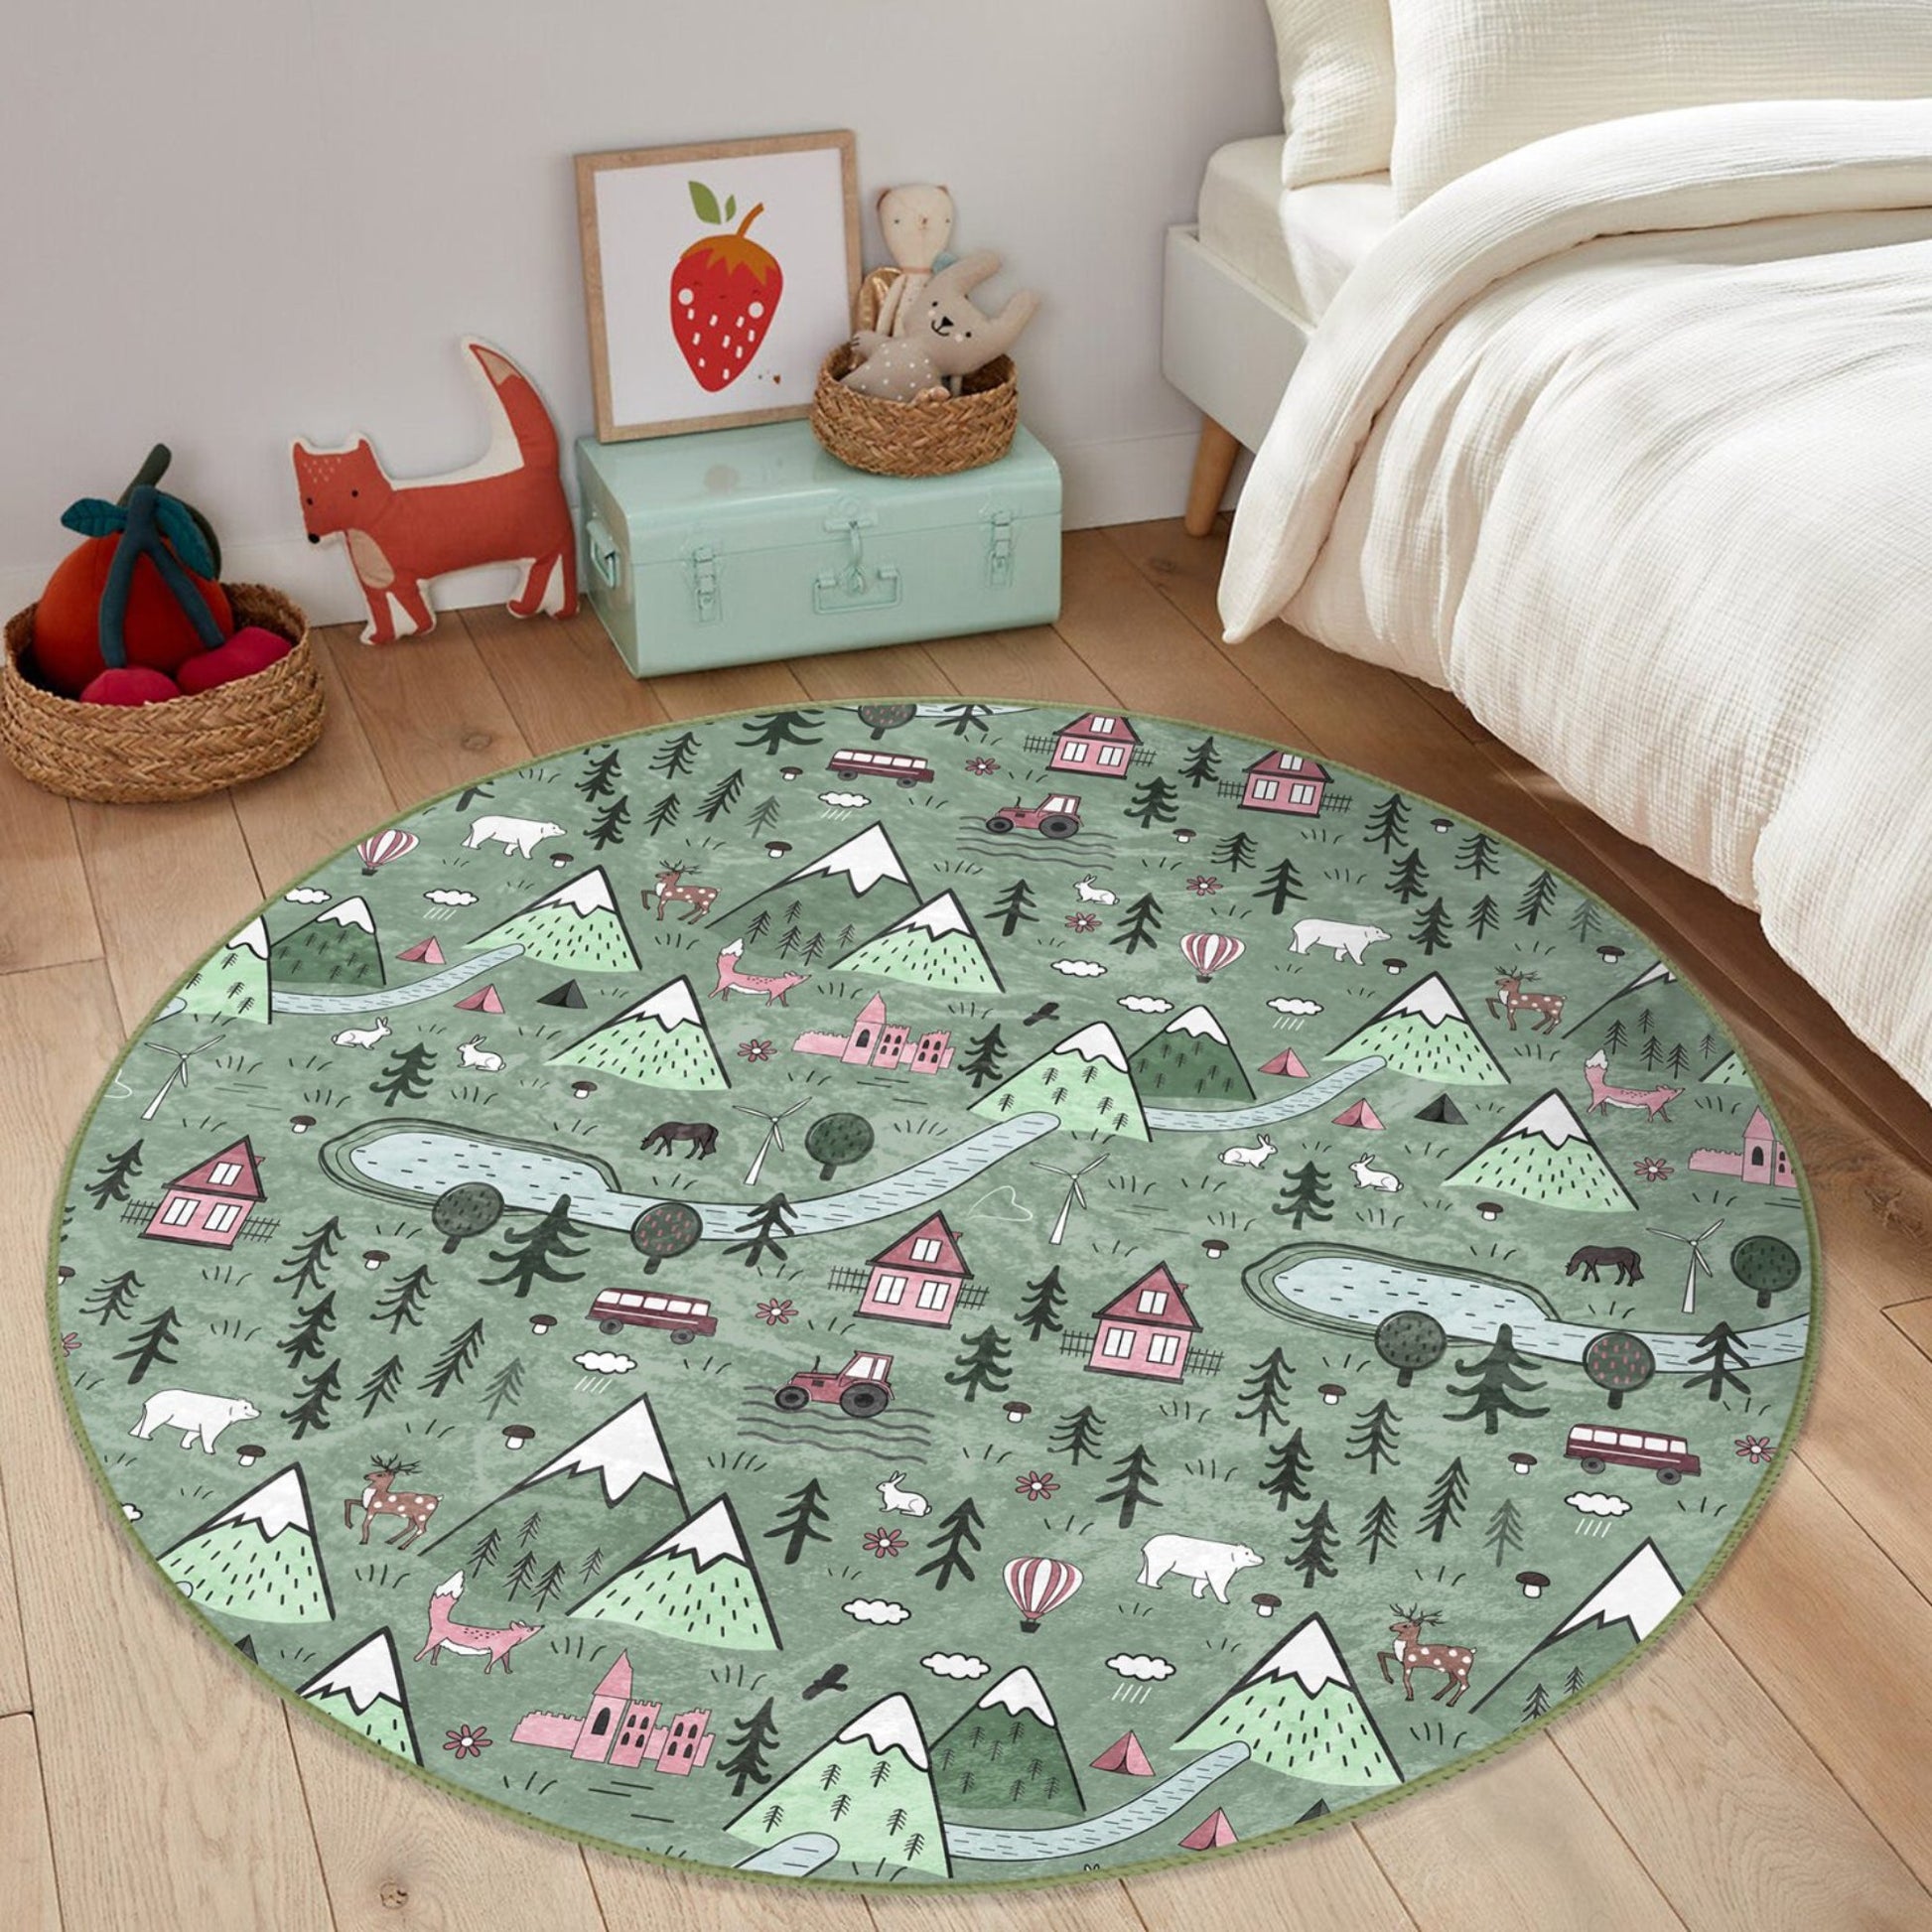 Outdoor Theme Rug for Kids Room